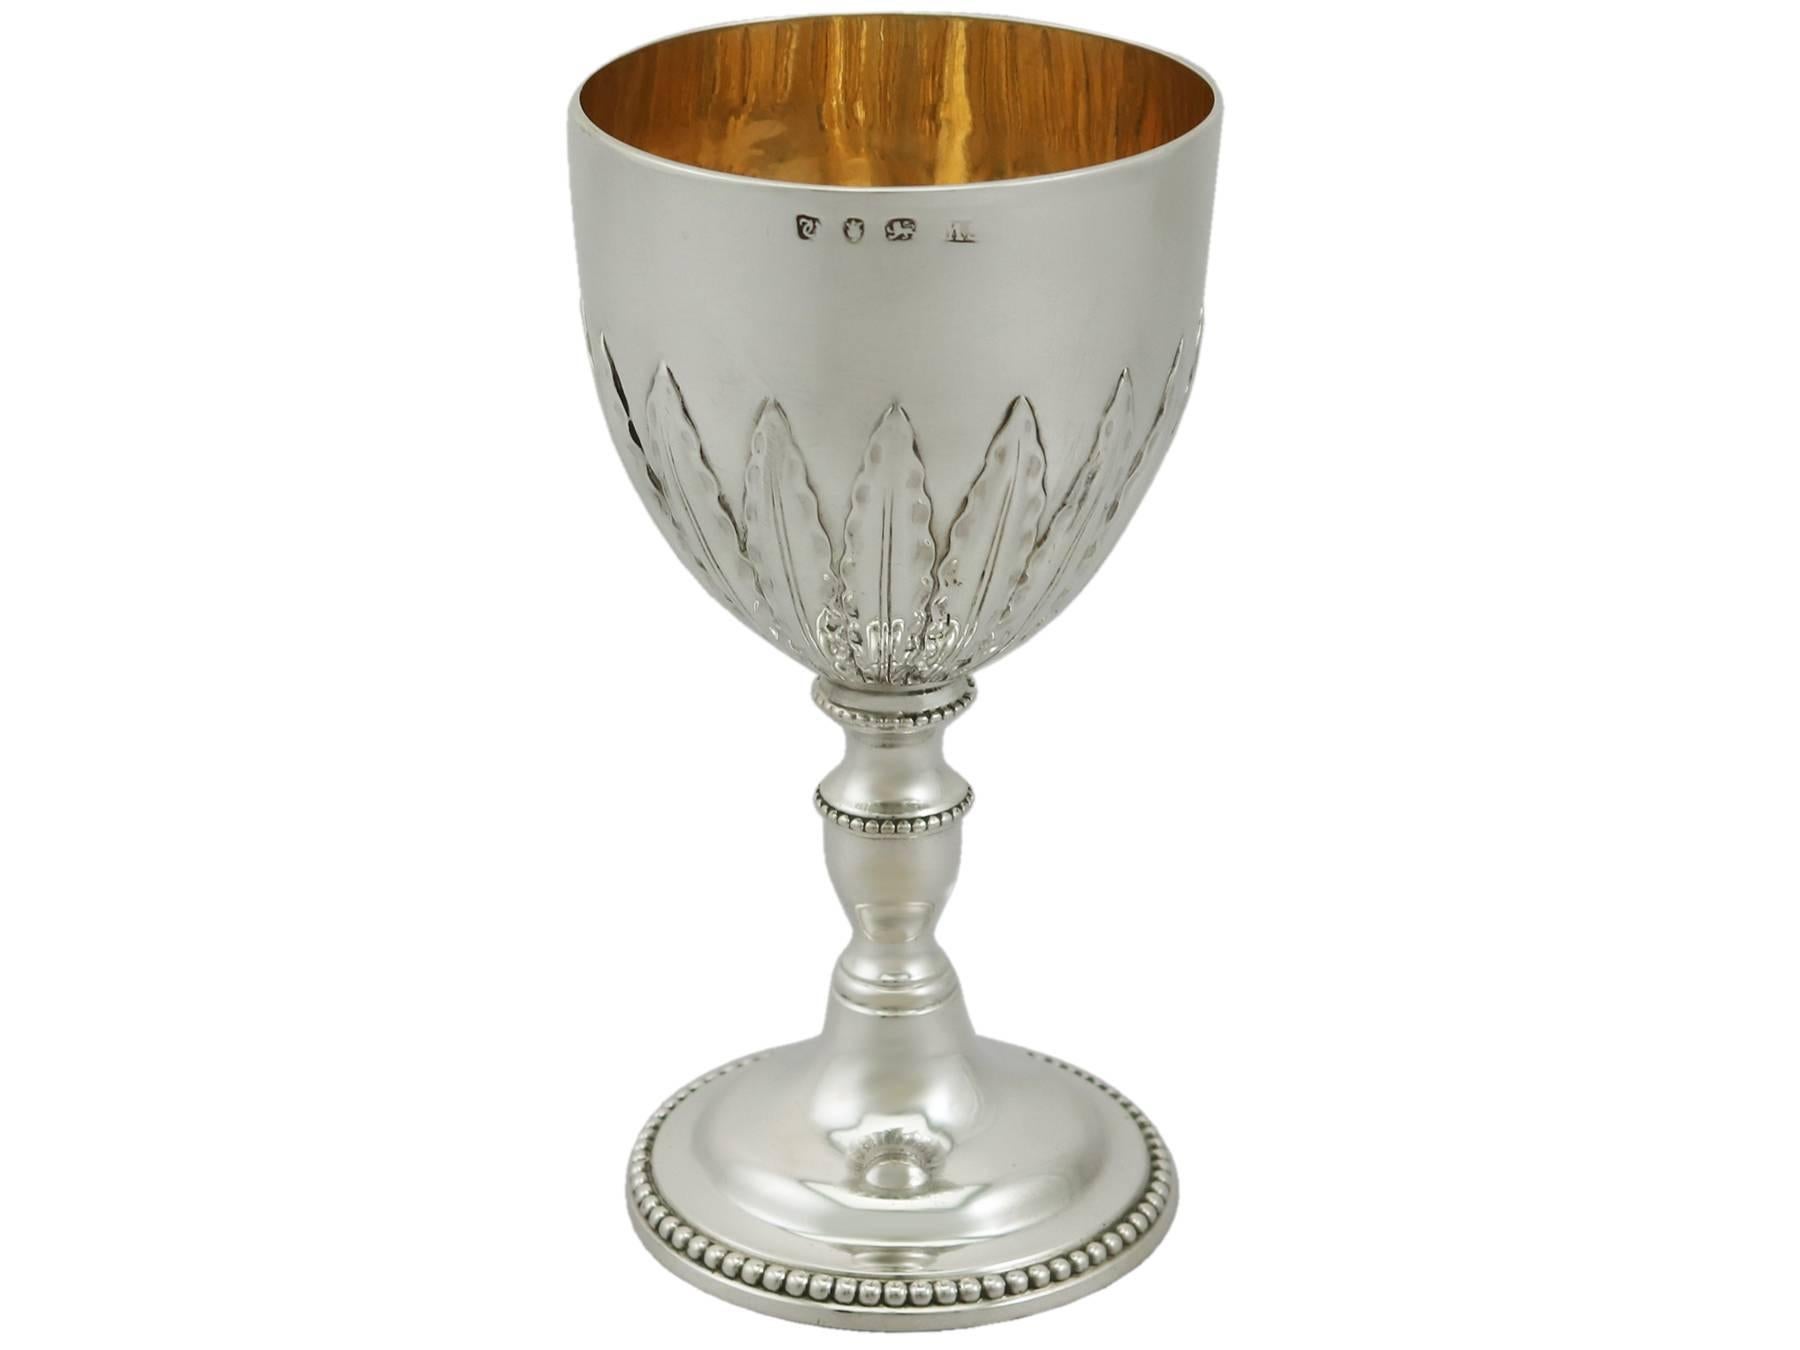 An exceptional, fine and impressive antique Georgian sterling silver goblet made by Charles Wright; an addition to our wine and drinks related silverware collection.

This exceptional antique Georgian sterling silver goblet has a circular bell